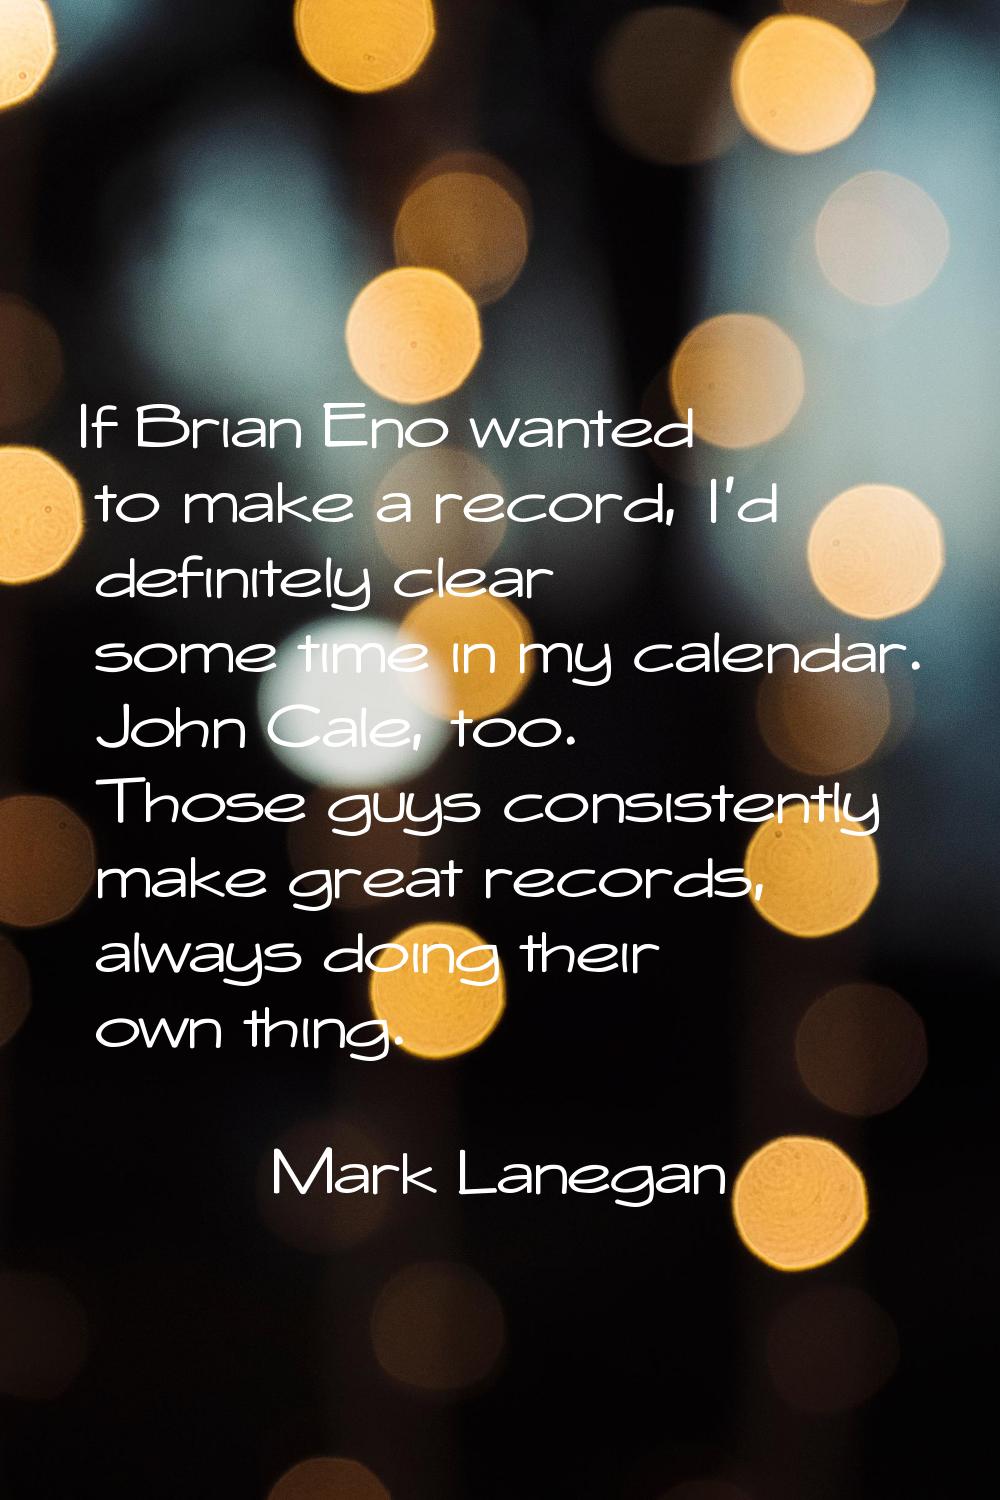 If Brian Eno wanted to make a record, I'd definitely clear some time in my calendar. John Cale, too